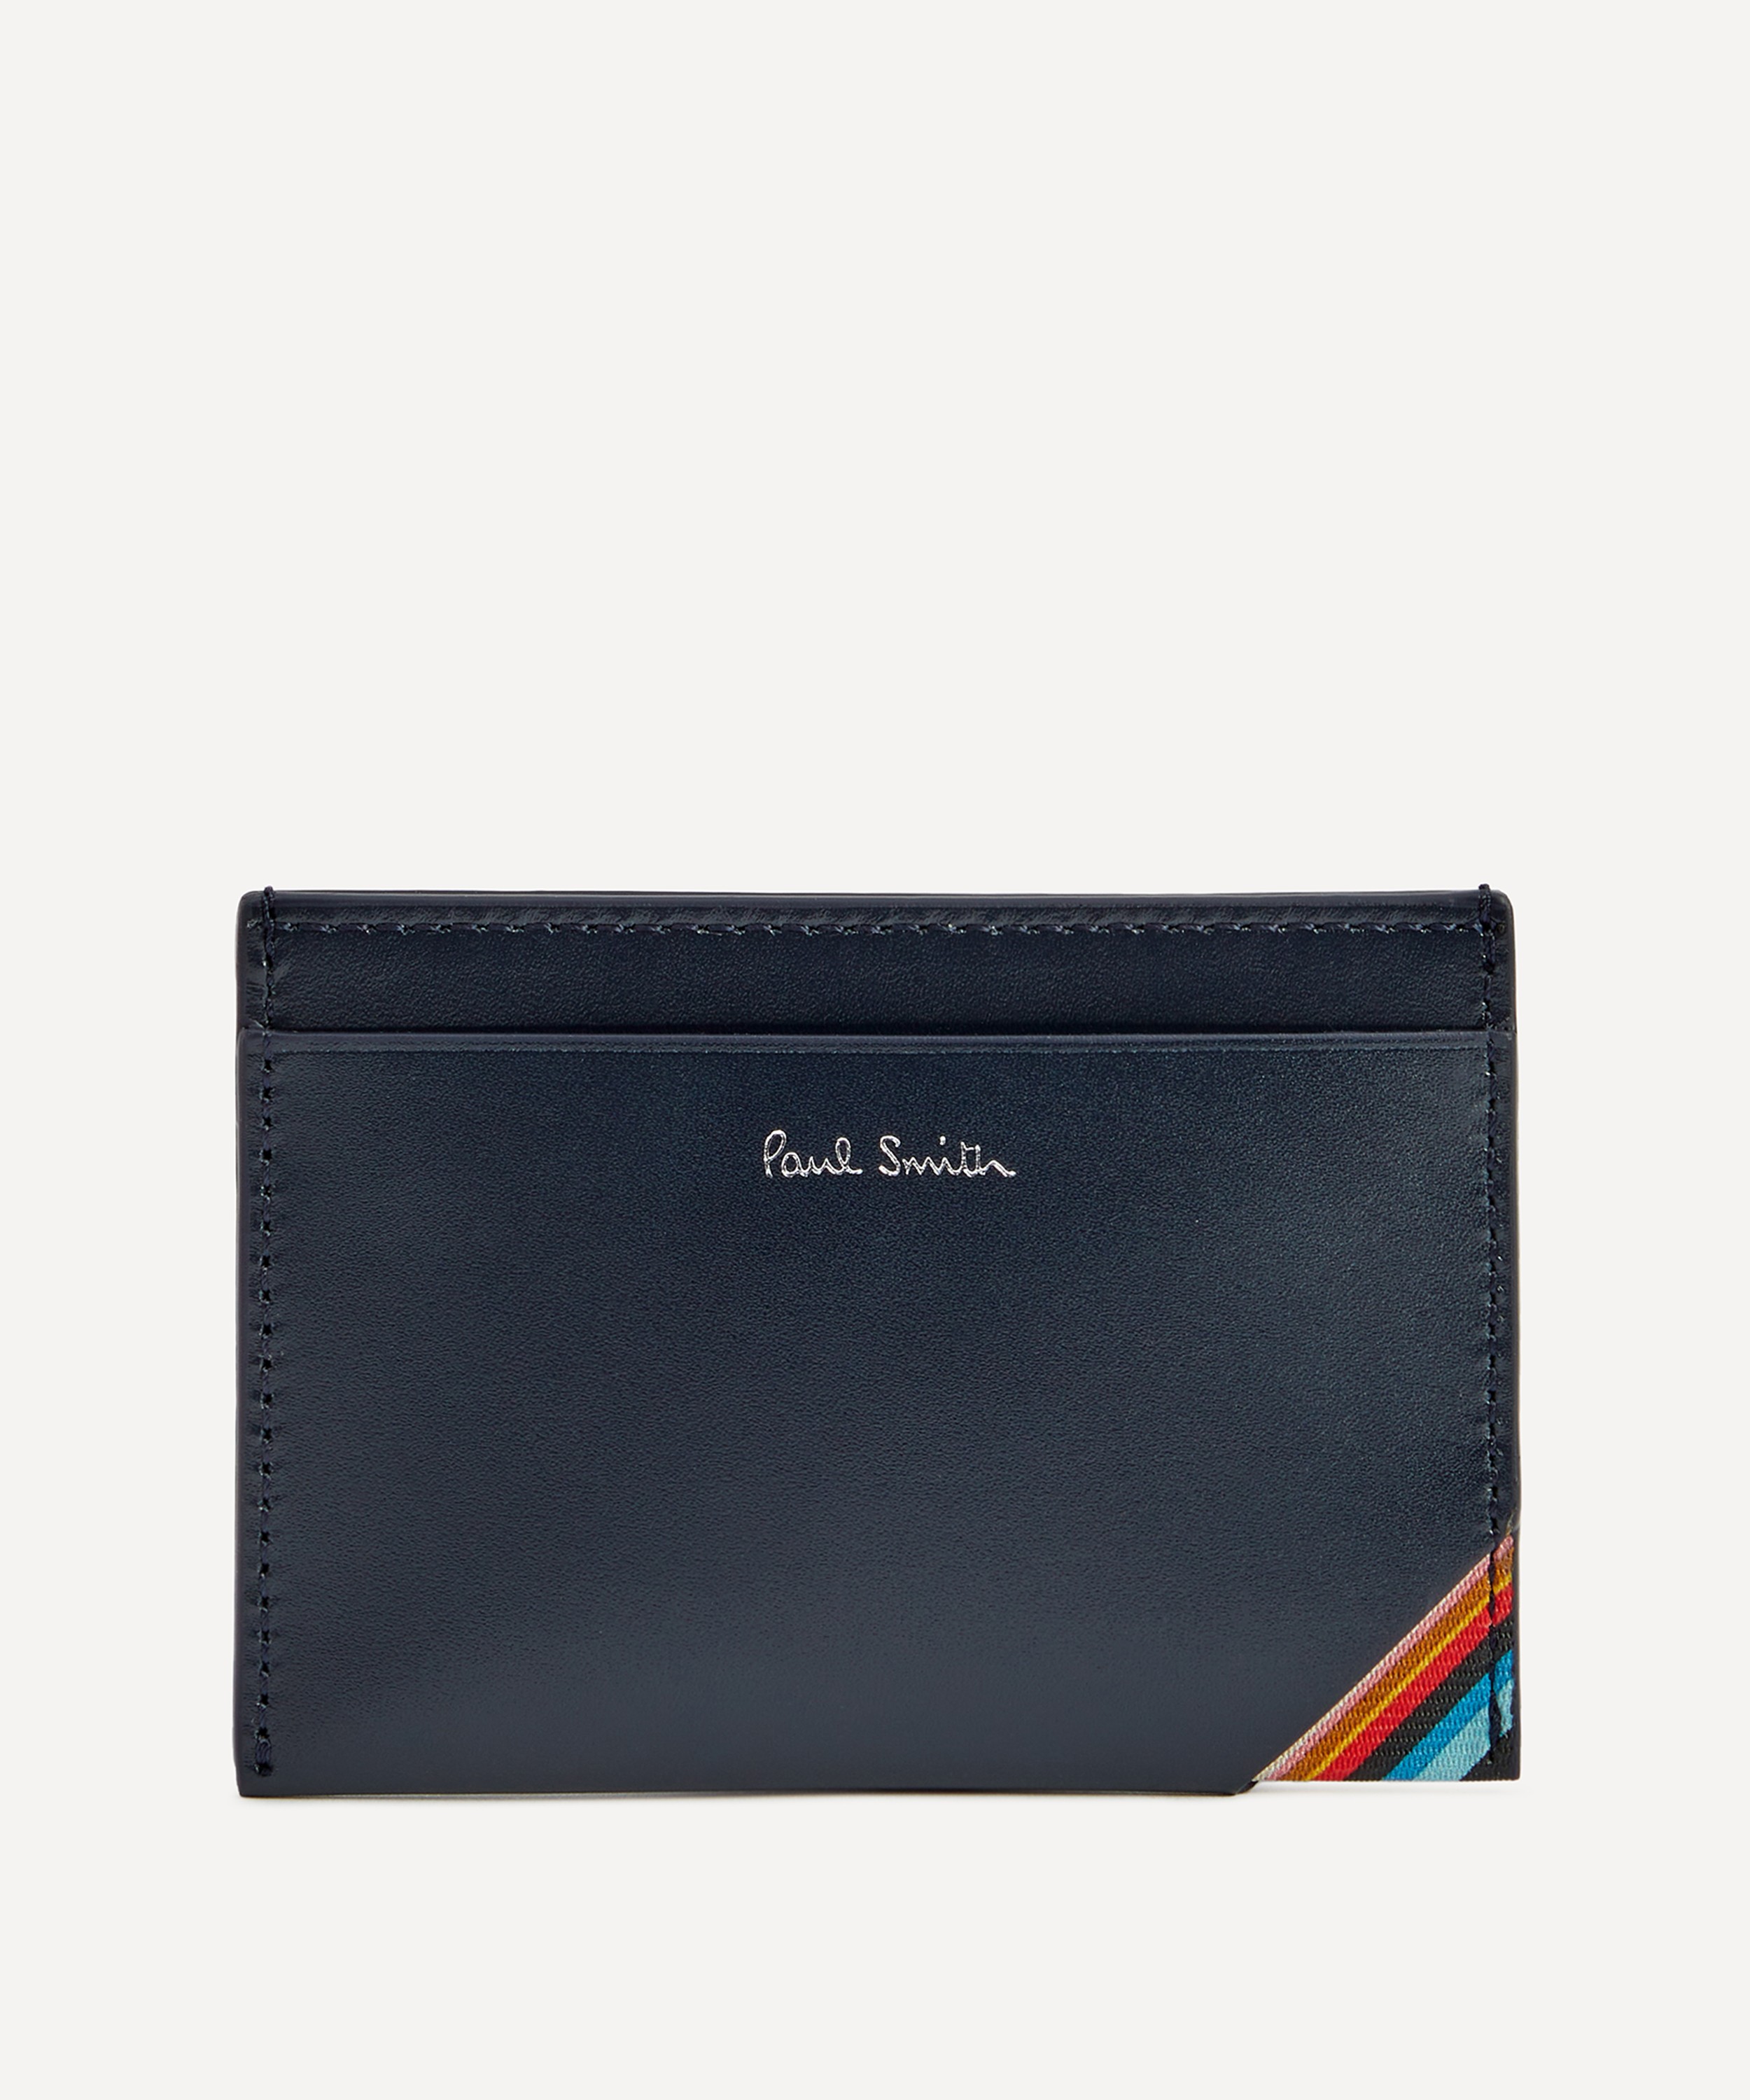 Paul Smith - Signature Stripe Detail Leather Card Holder